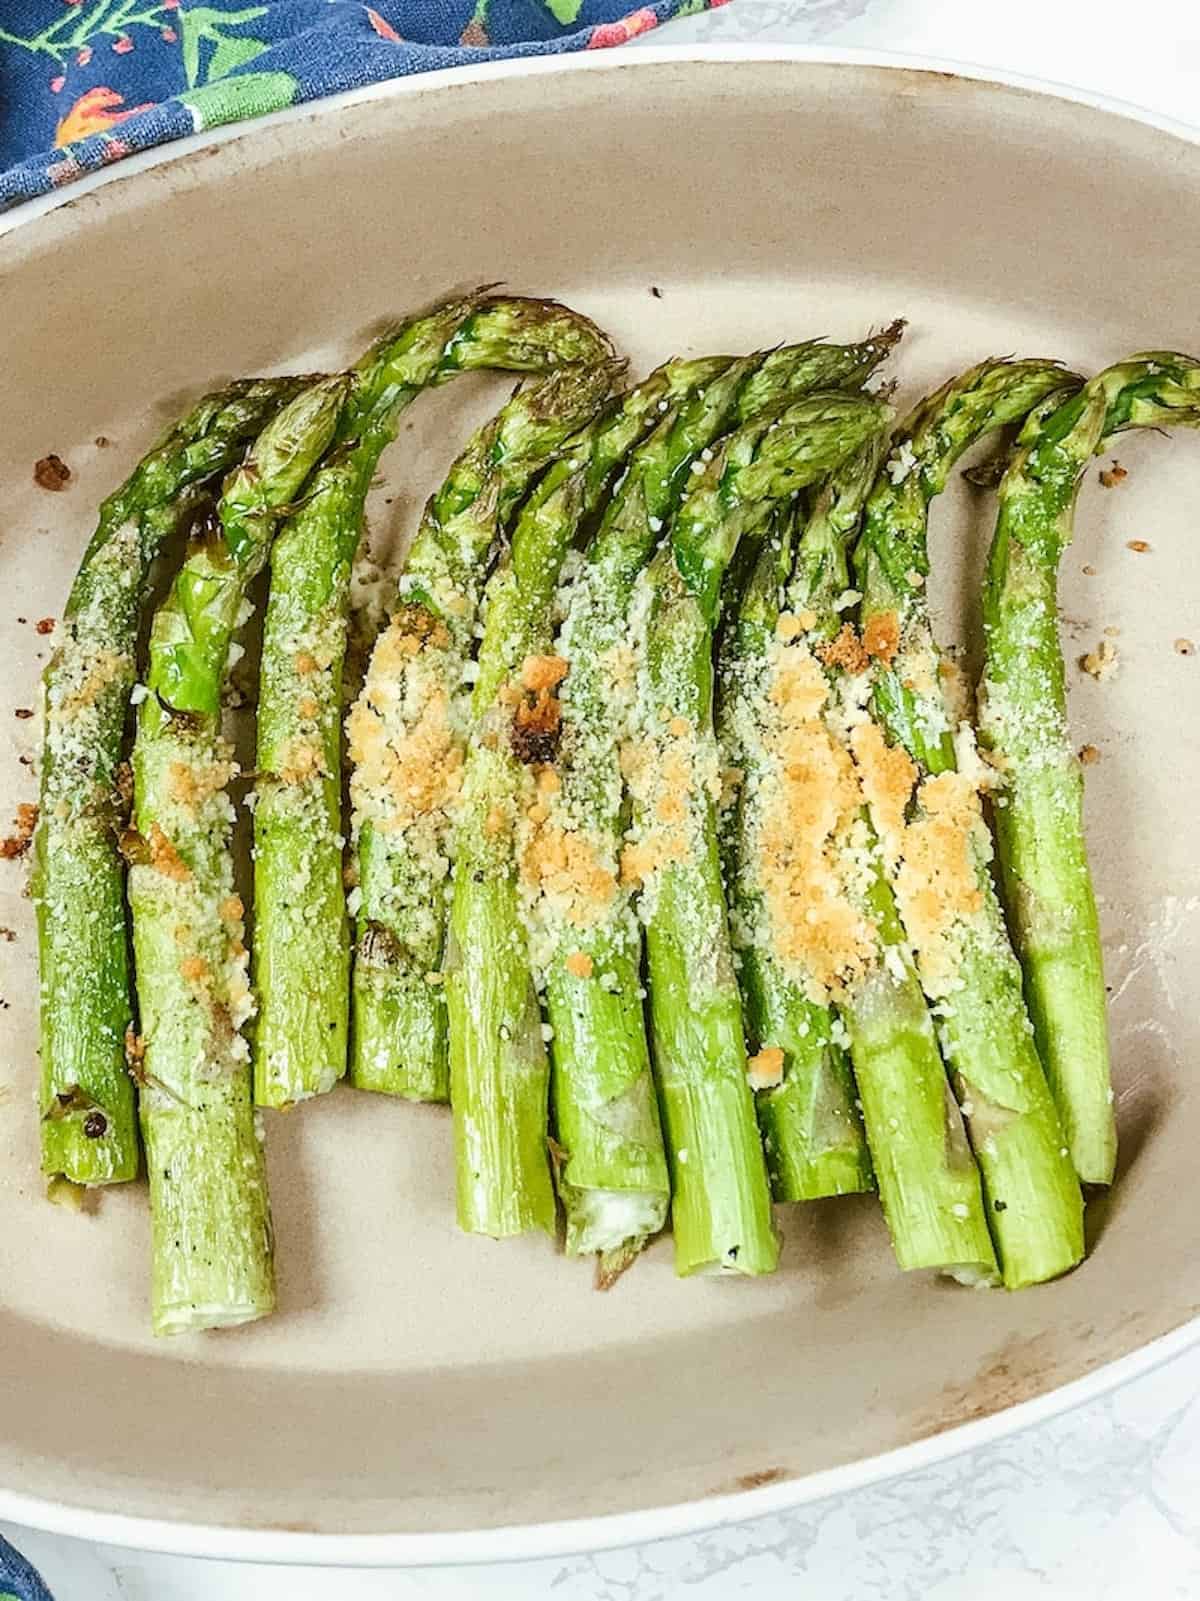 An oval baking dish filled with roasted asparagus topped with golden brown parmesan cheese.